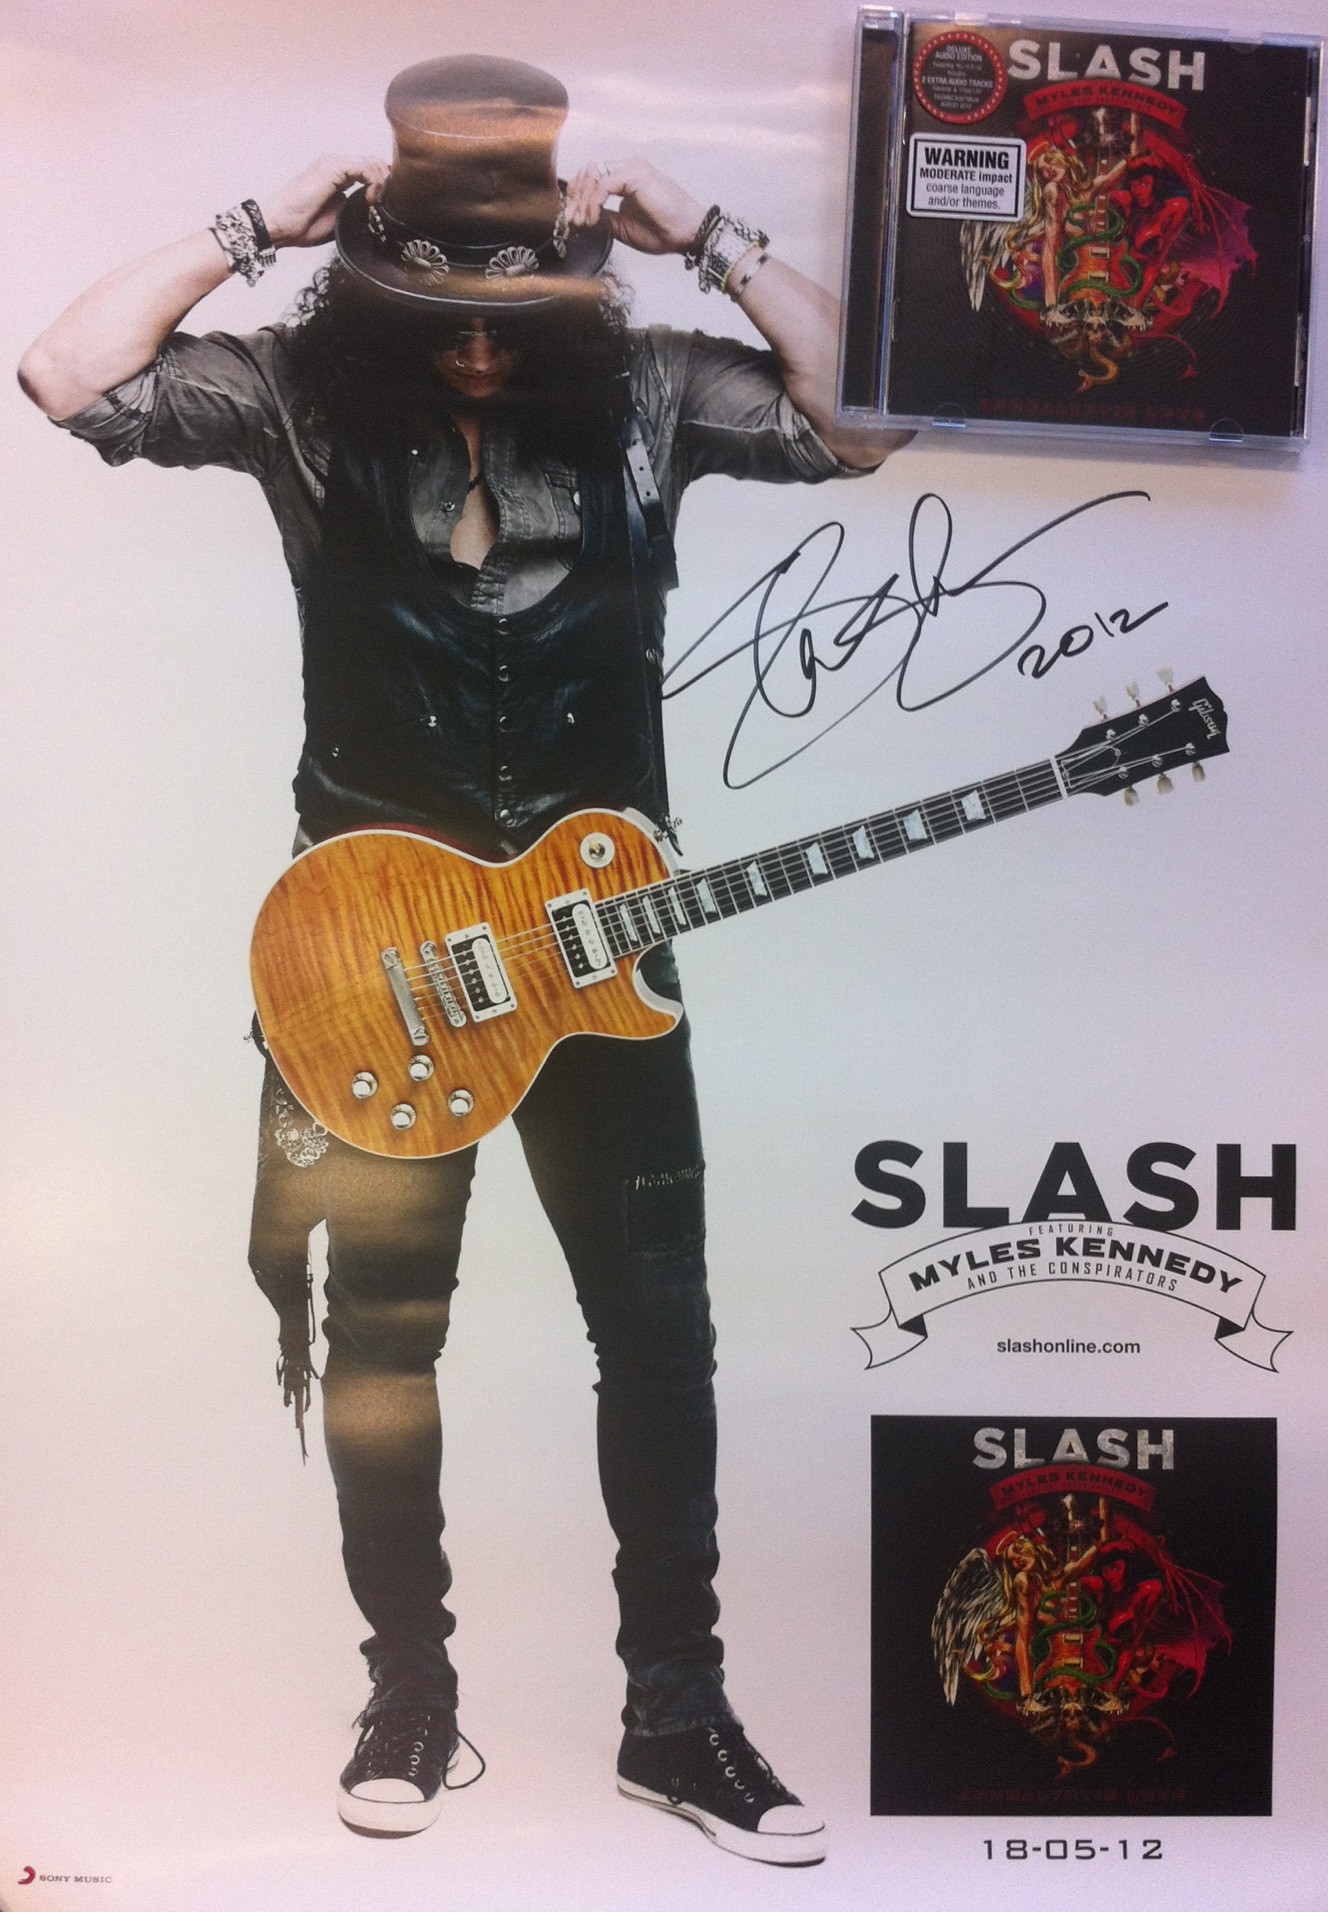 Show us your ‘Slash’ to win a signed poster… (CLOSED)